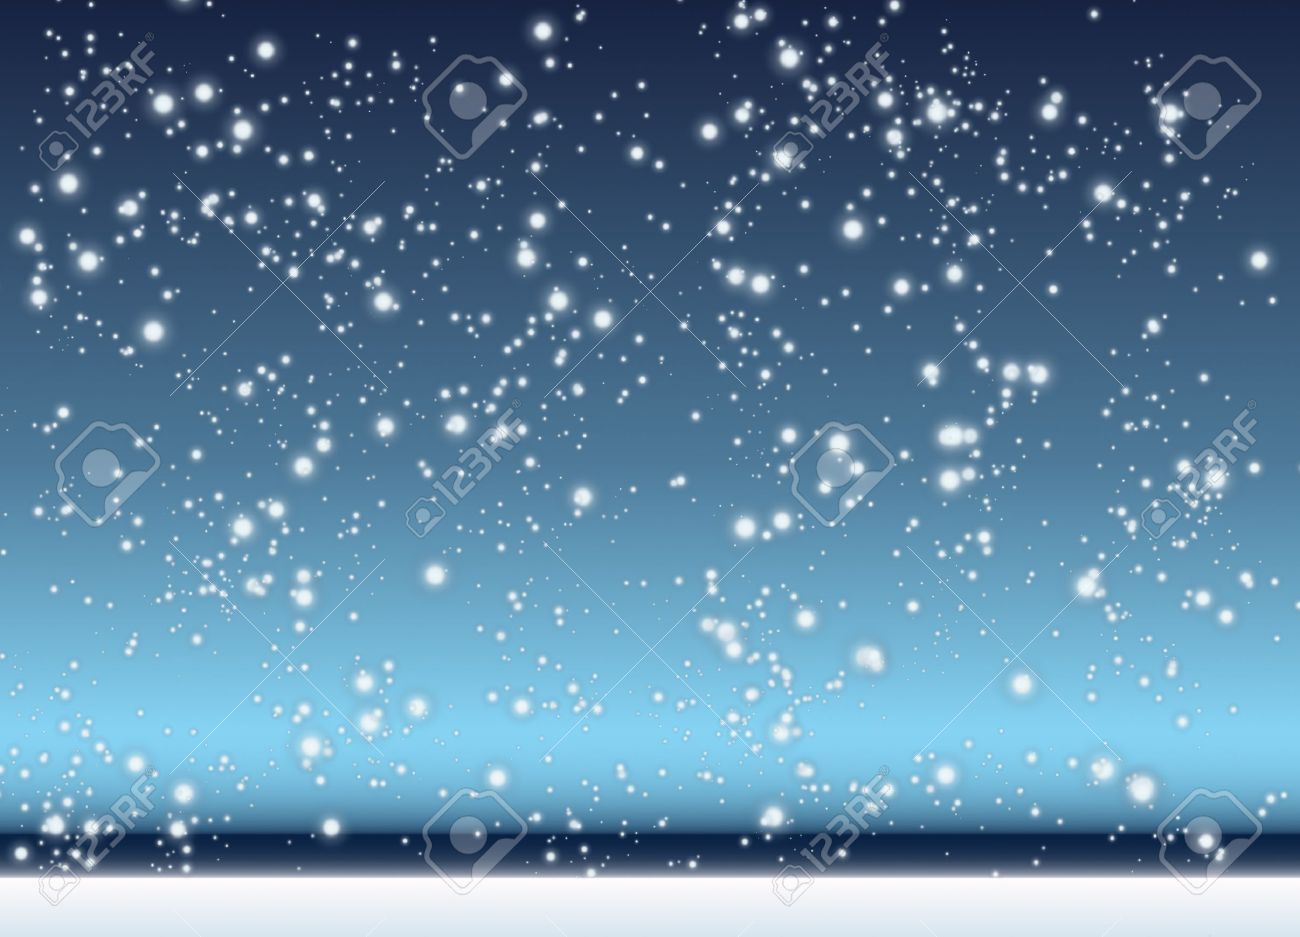 Abstract Background With Winter Scene Snow Stock Photo